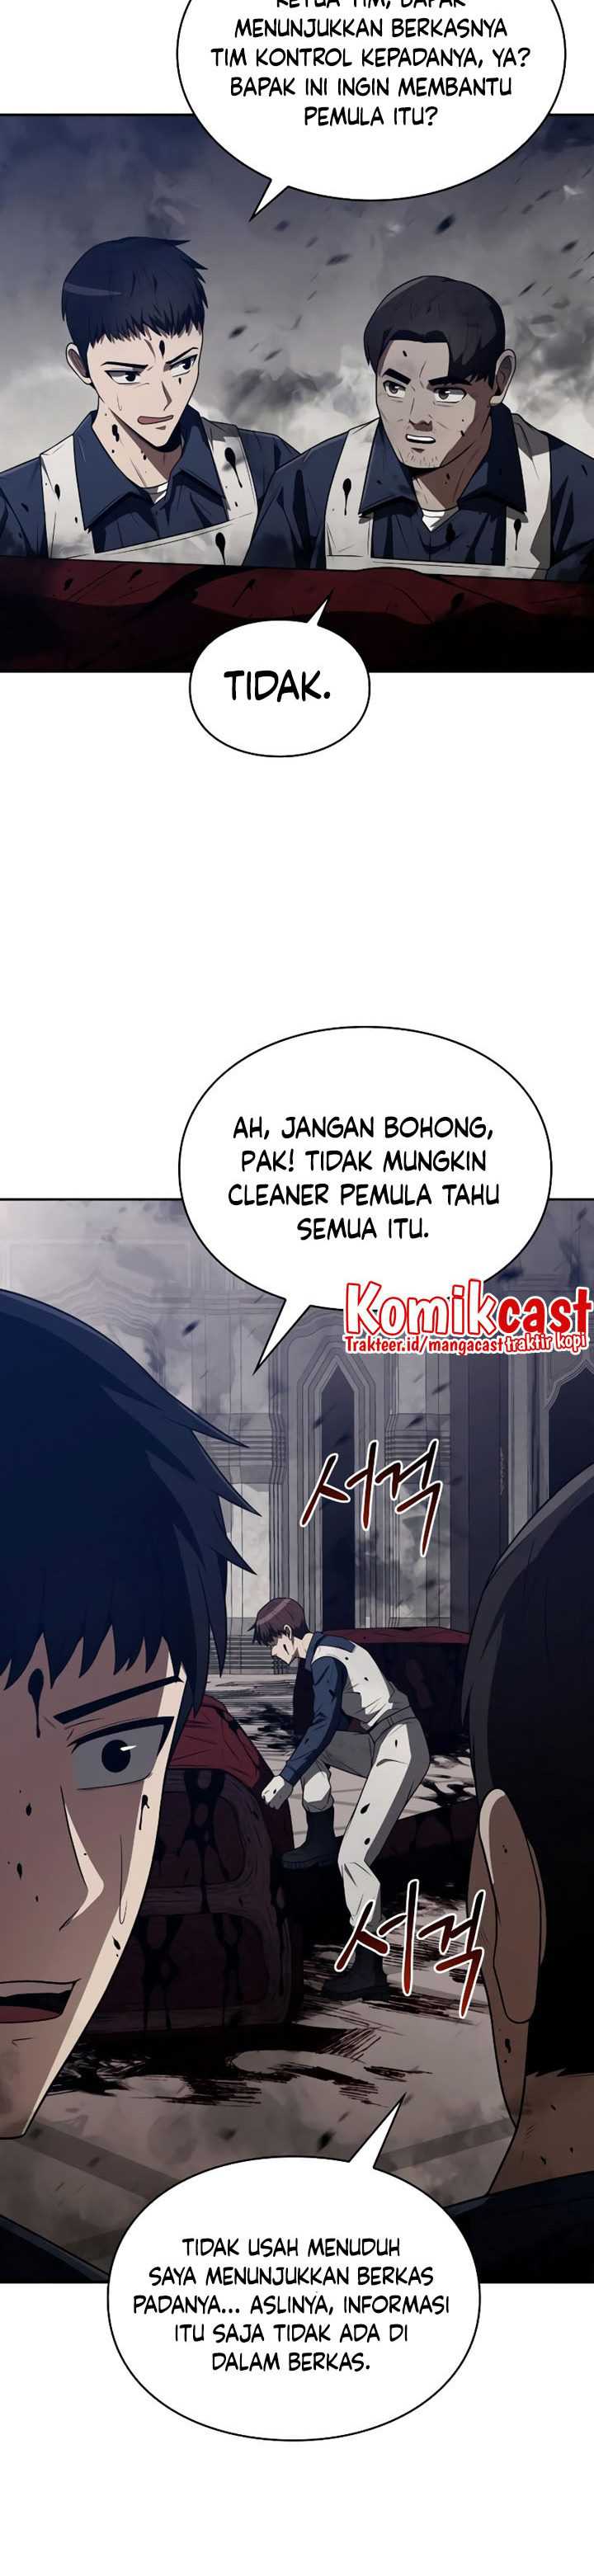 Clever Cleaning Life Of The Returned Genius Hunter Chapter 04